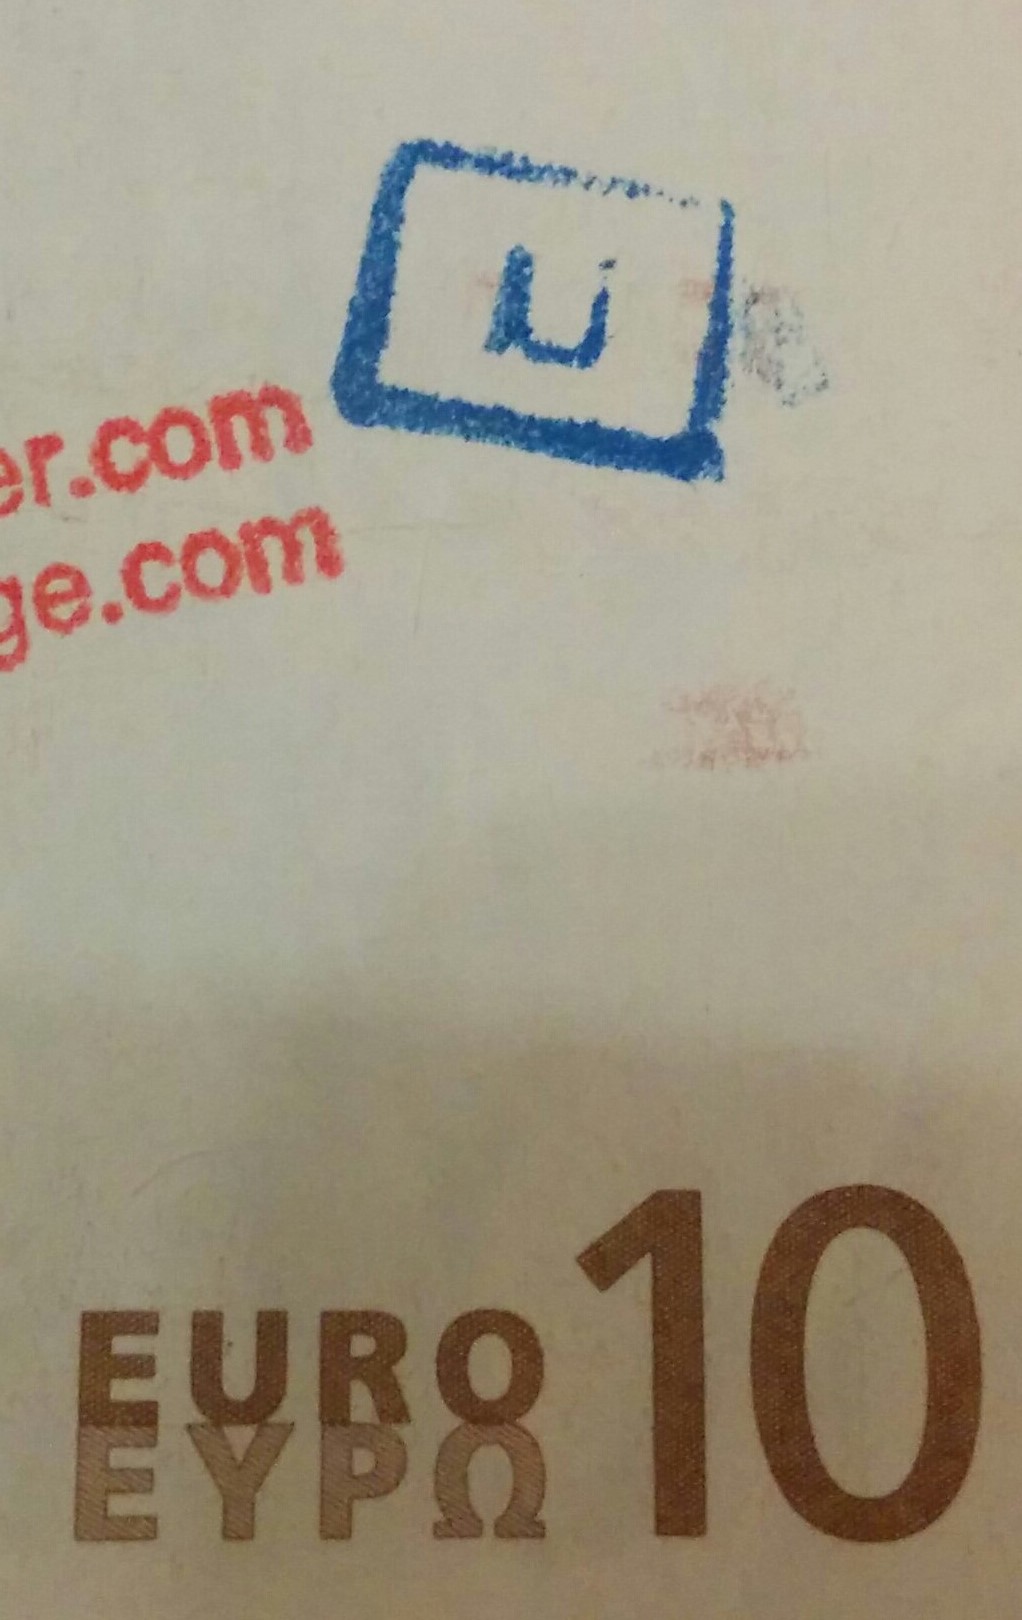 Bill came with the &quot;u&quot; or &quot;n&quot; in the square. URL stamp is mine.